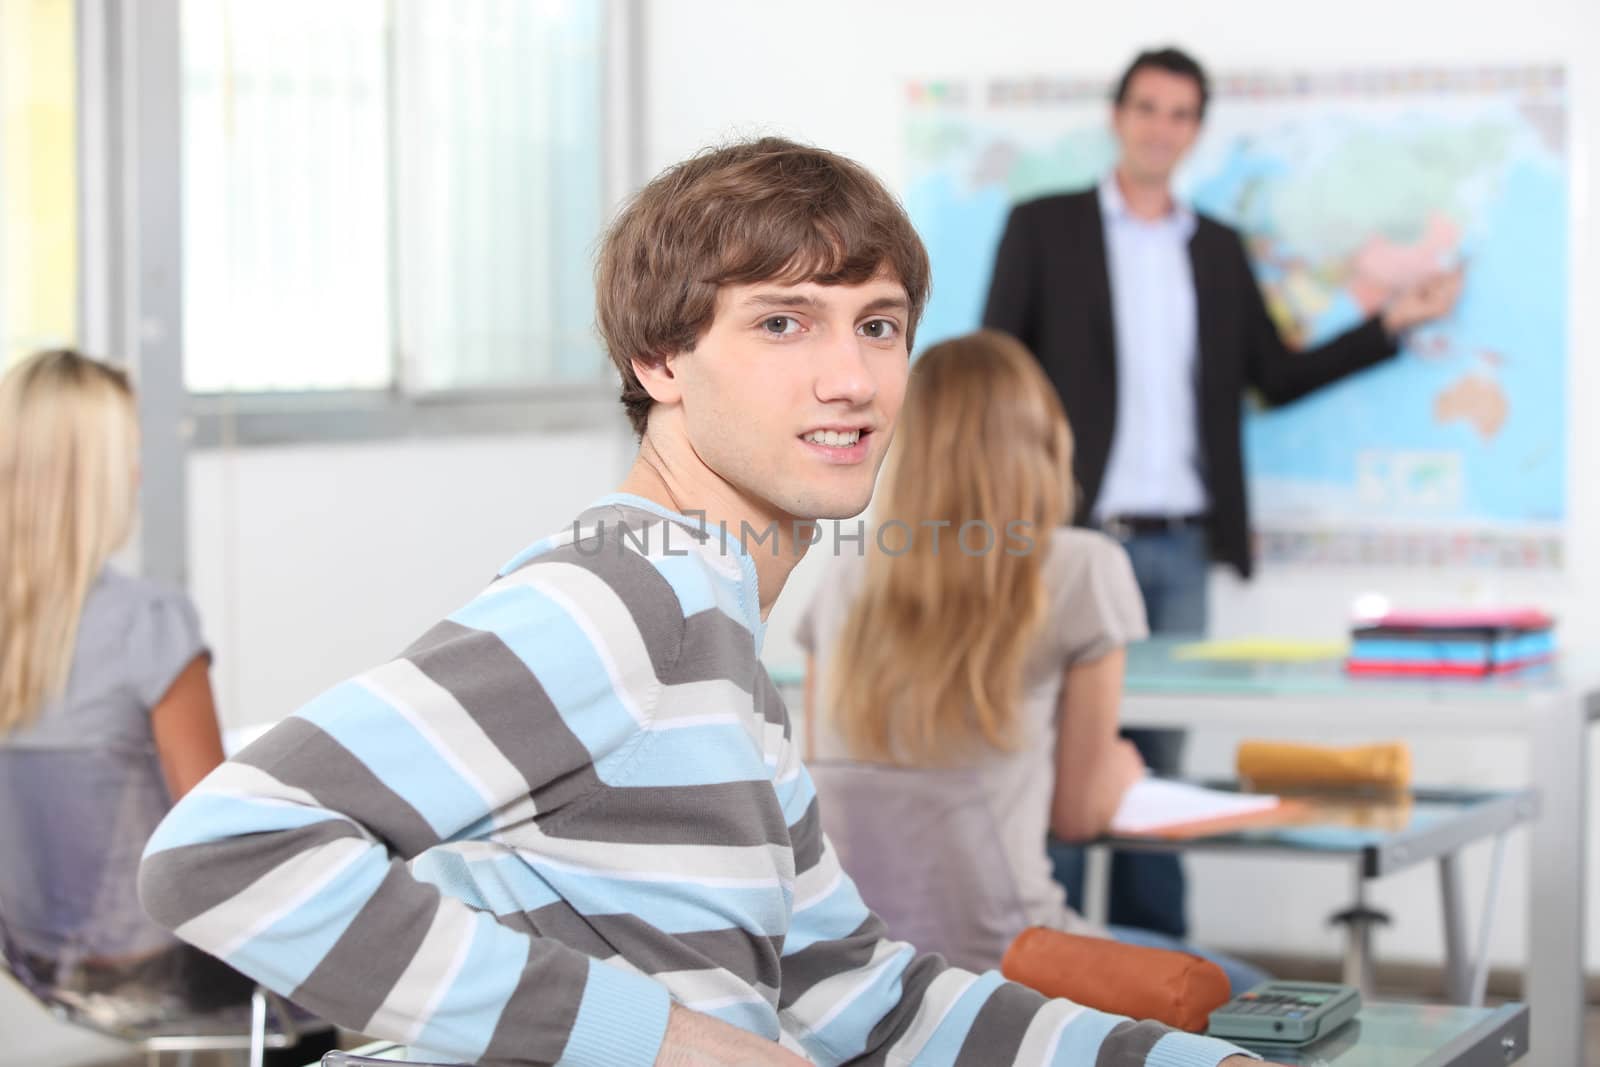 portrait of a young man in classroom